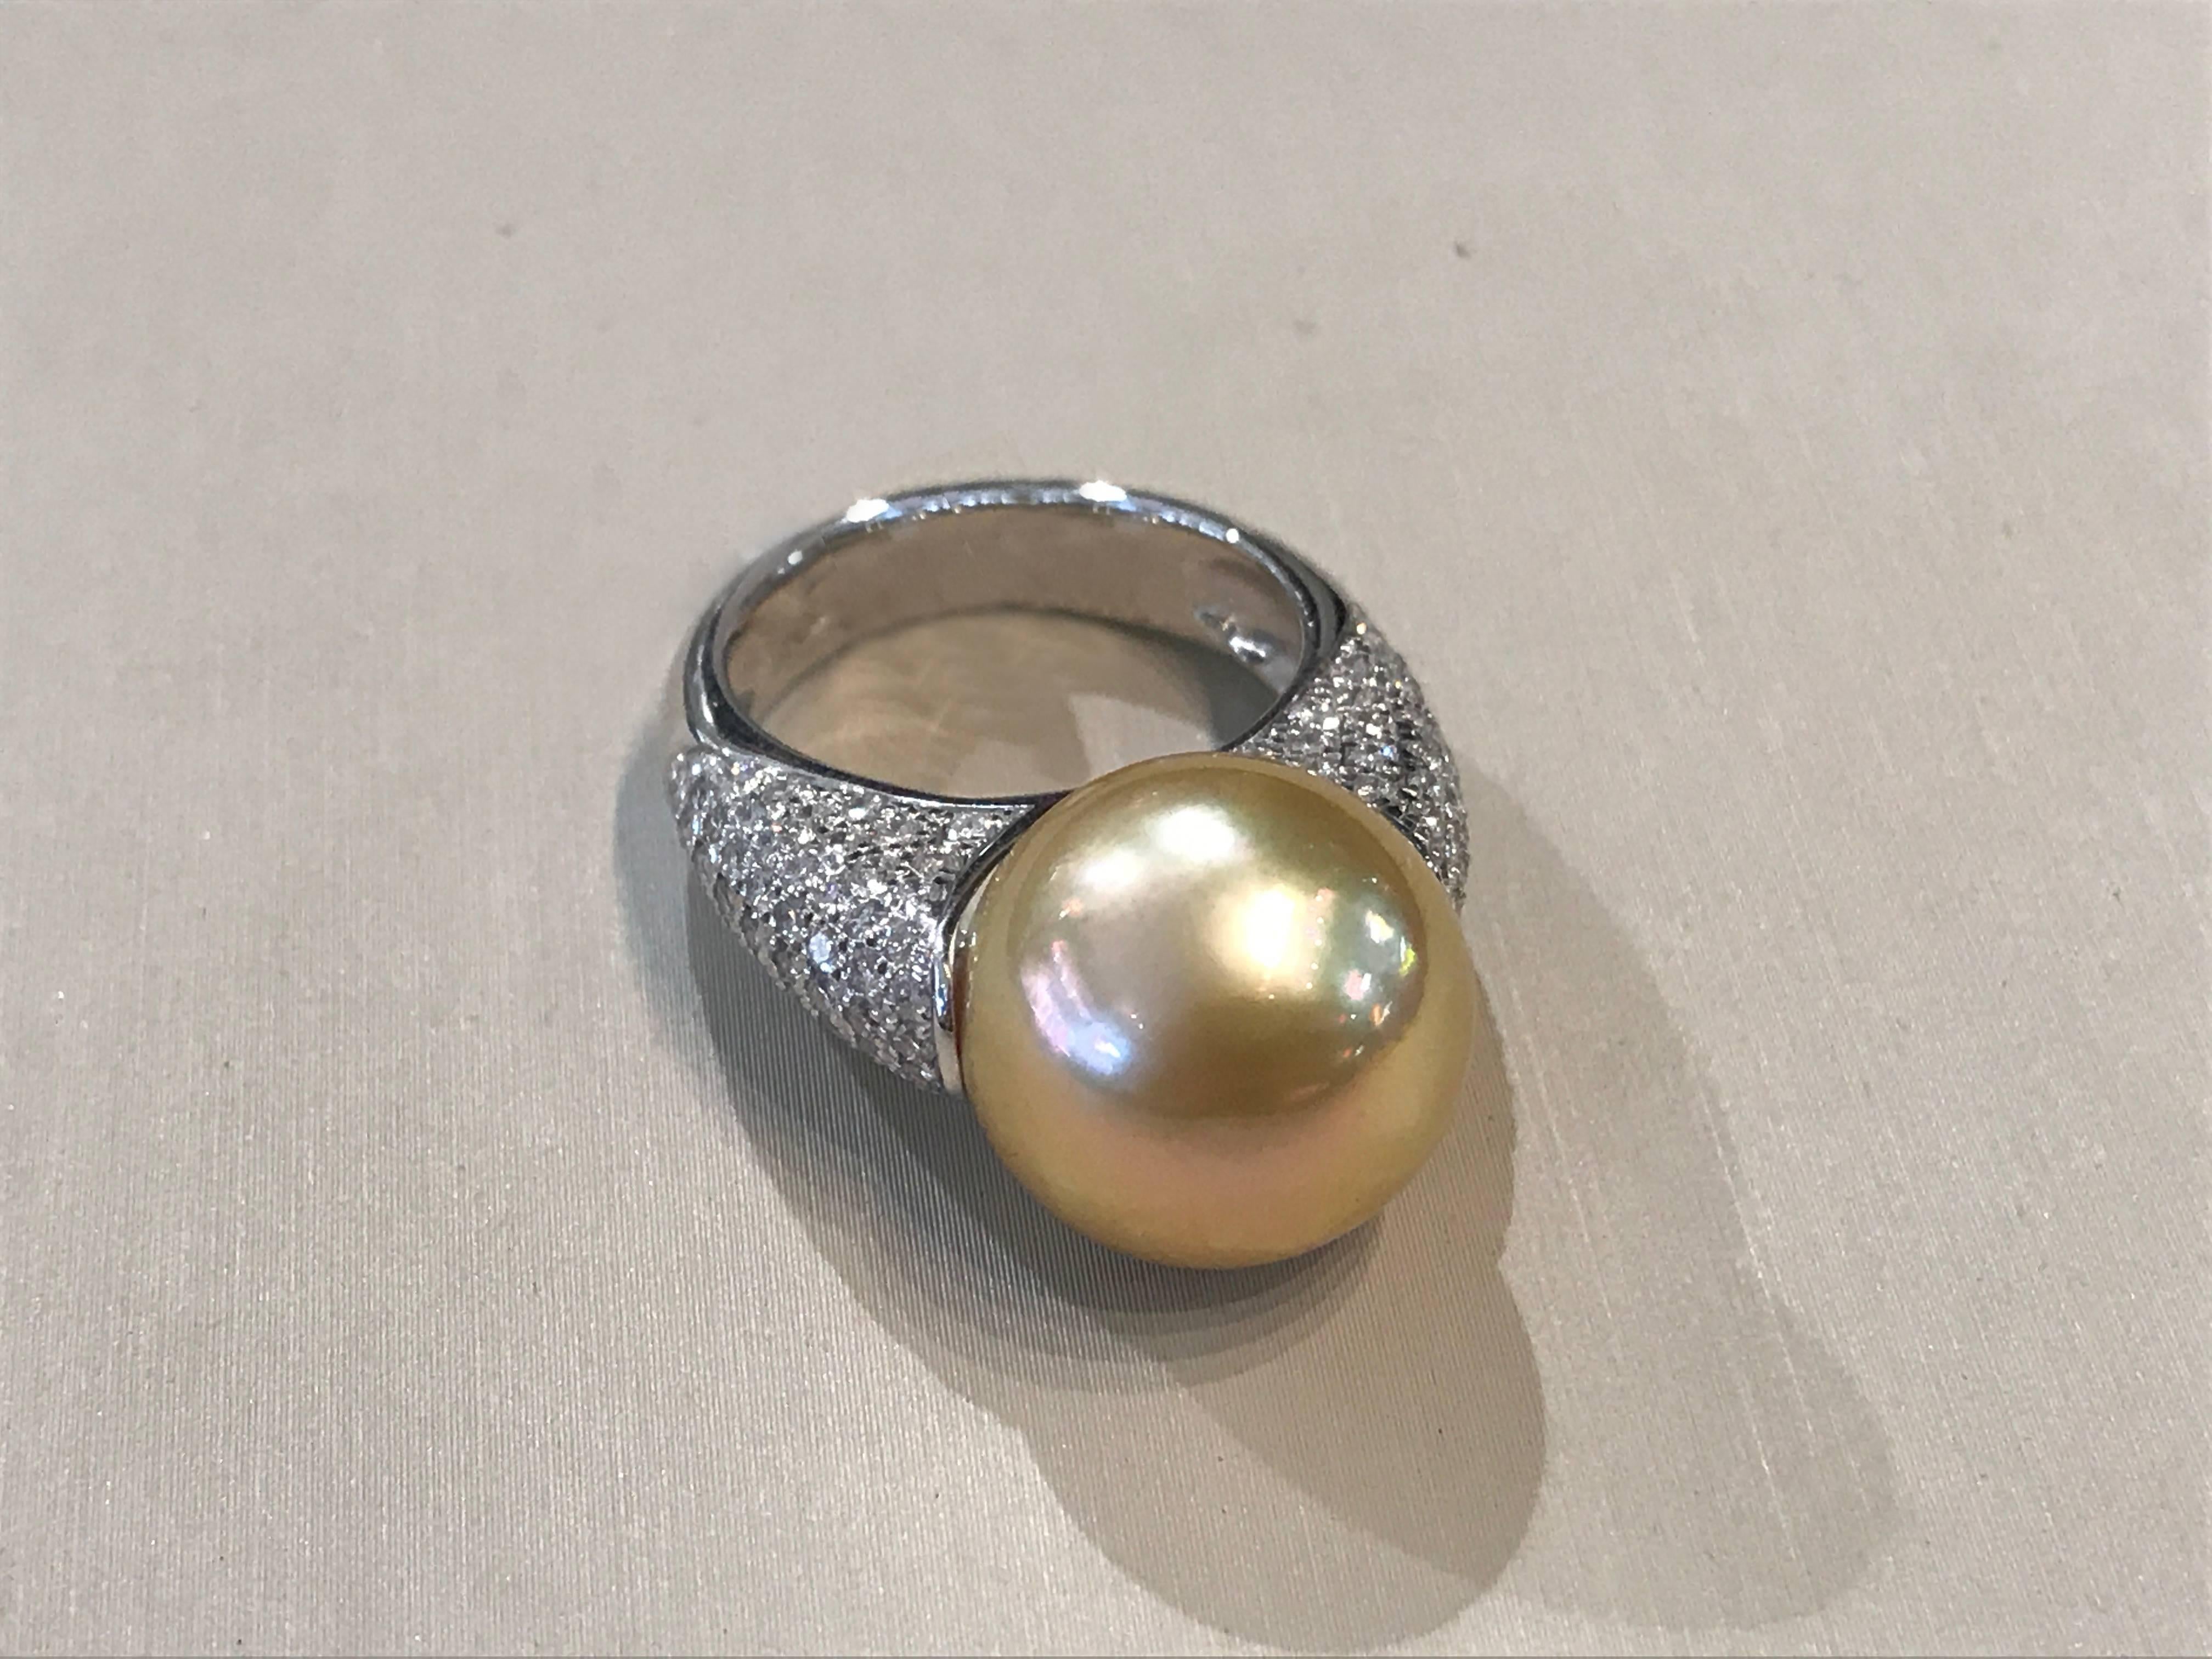 Cultured Pearl and White Gold Ring.
Cultured Pearl Golden Color
White Gold 18 Carat 